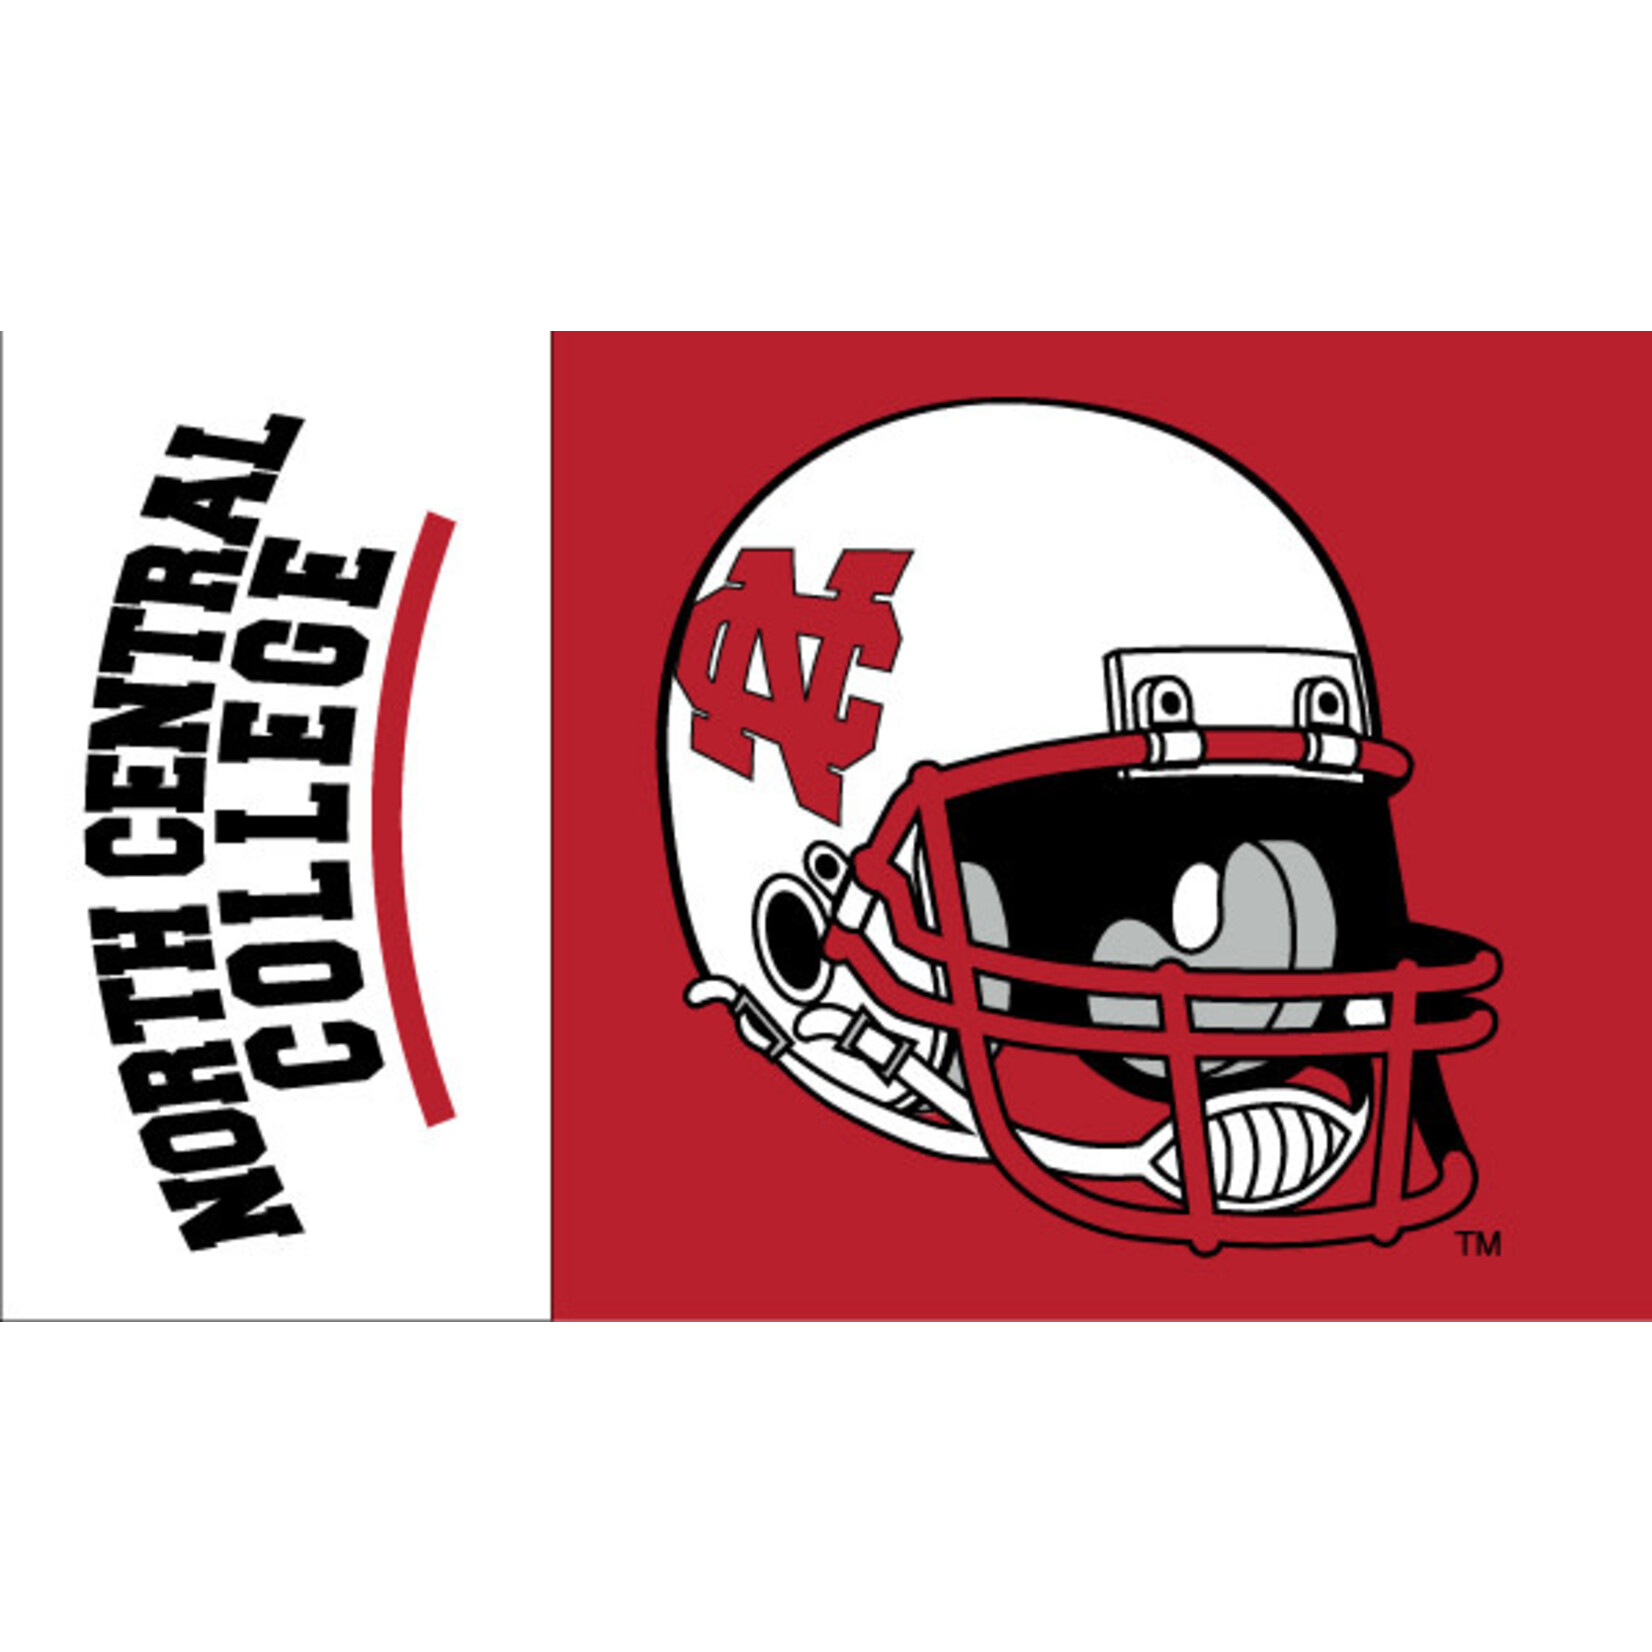 Sewing Concepts NEW! 3x5 North Central College Flag w/Football Helmet design